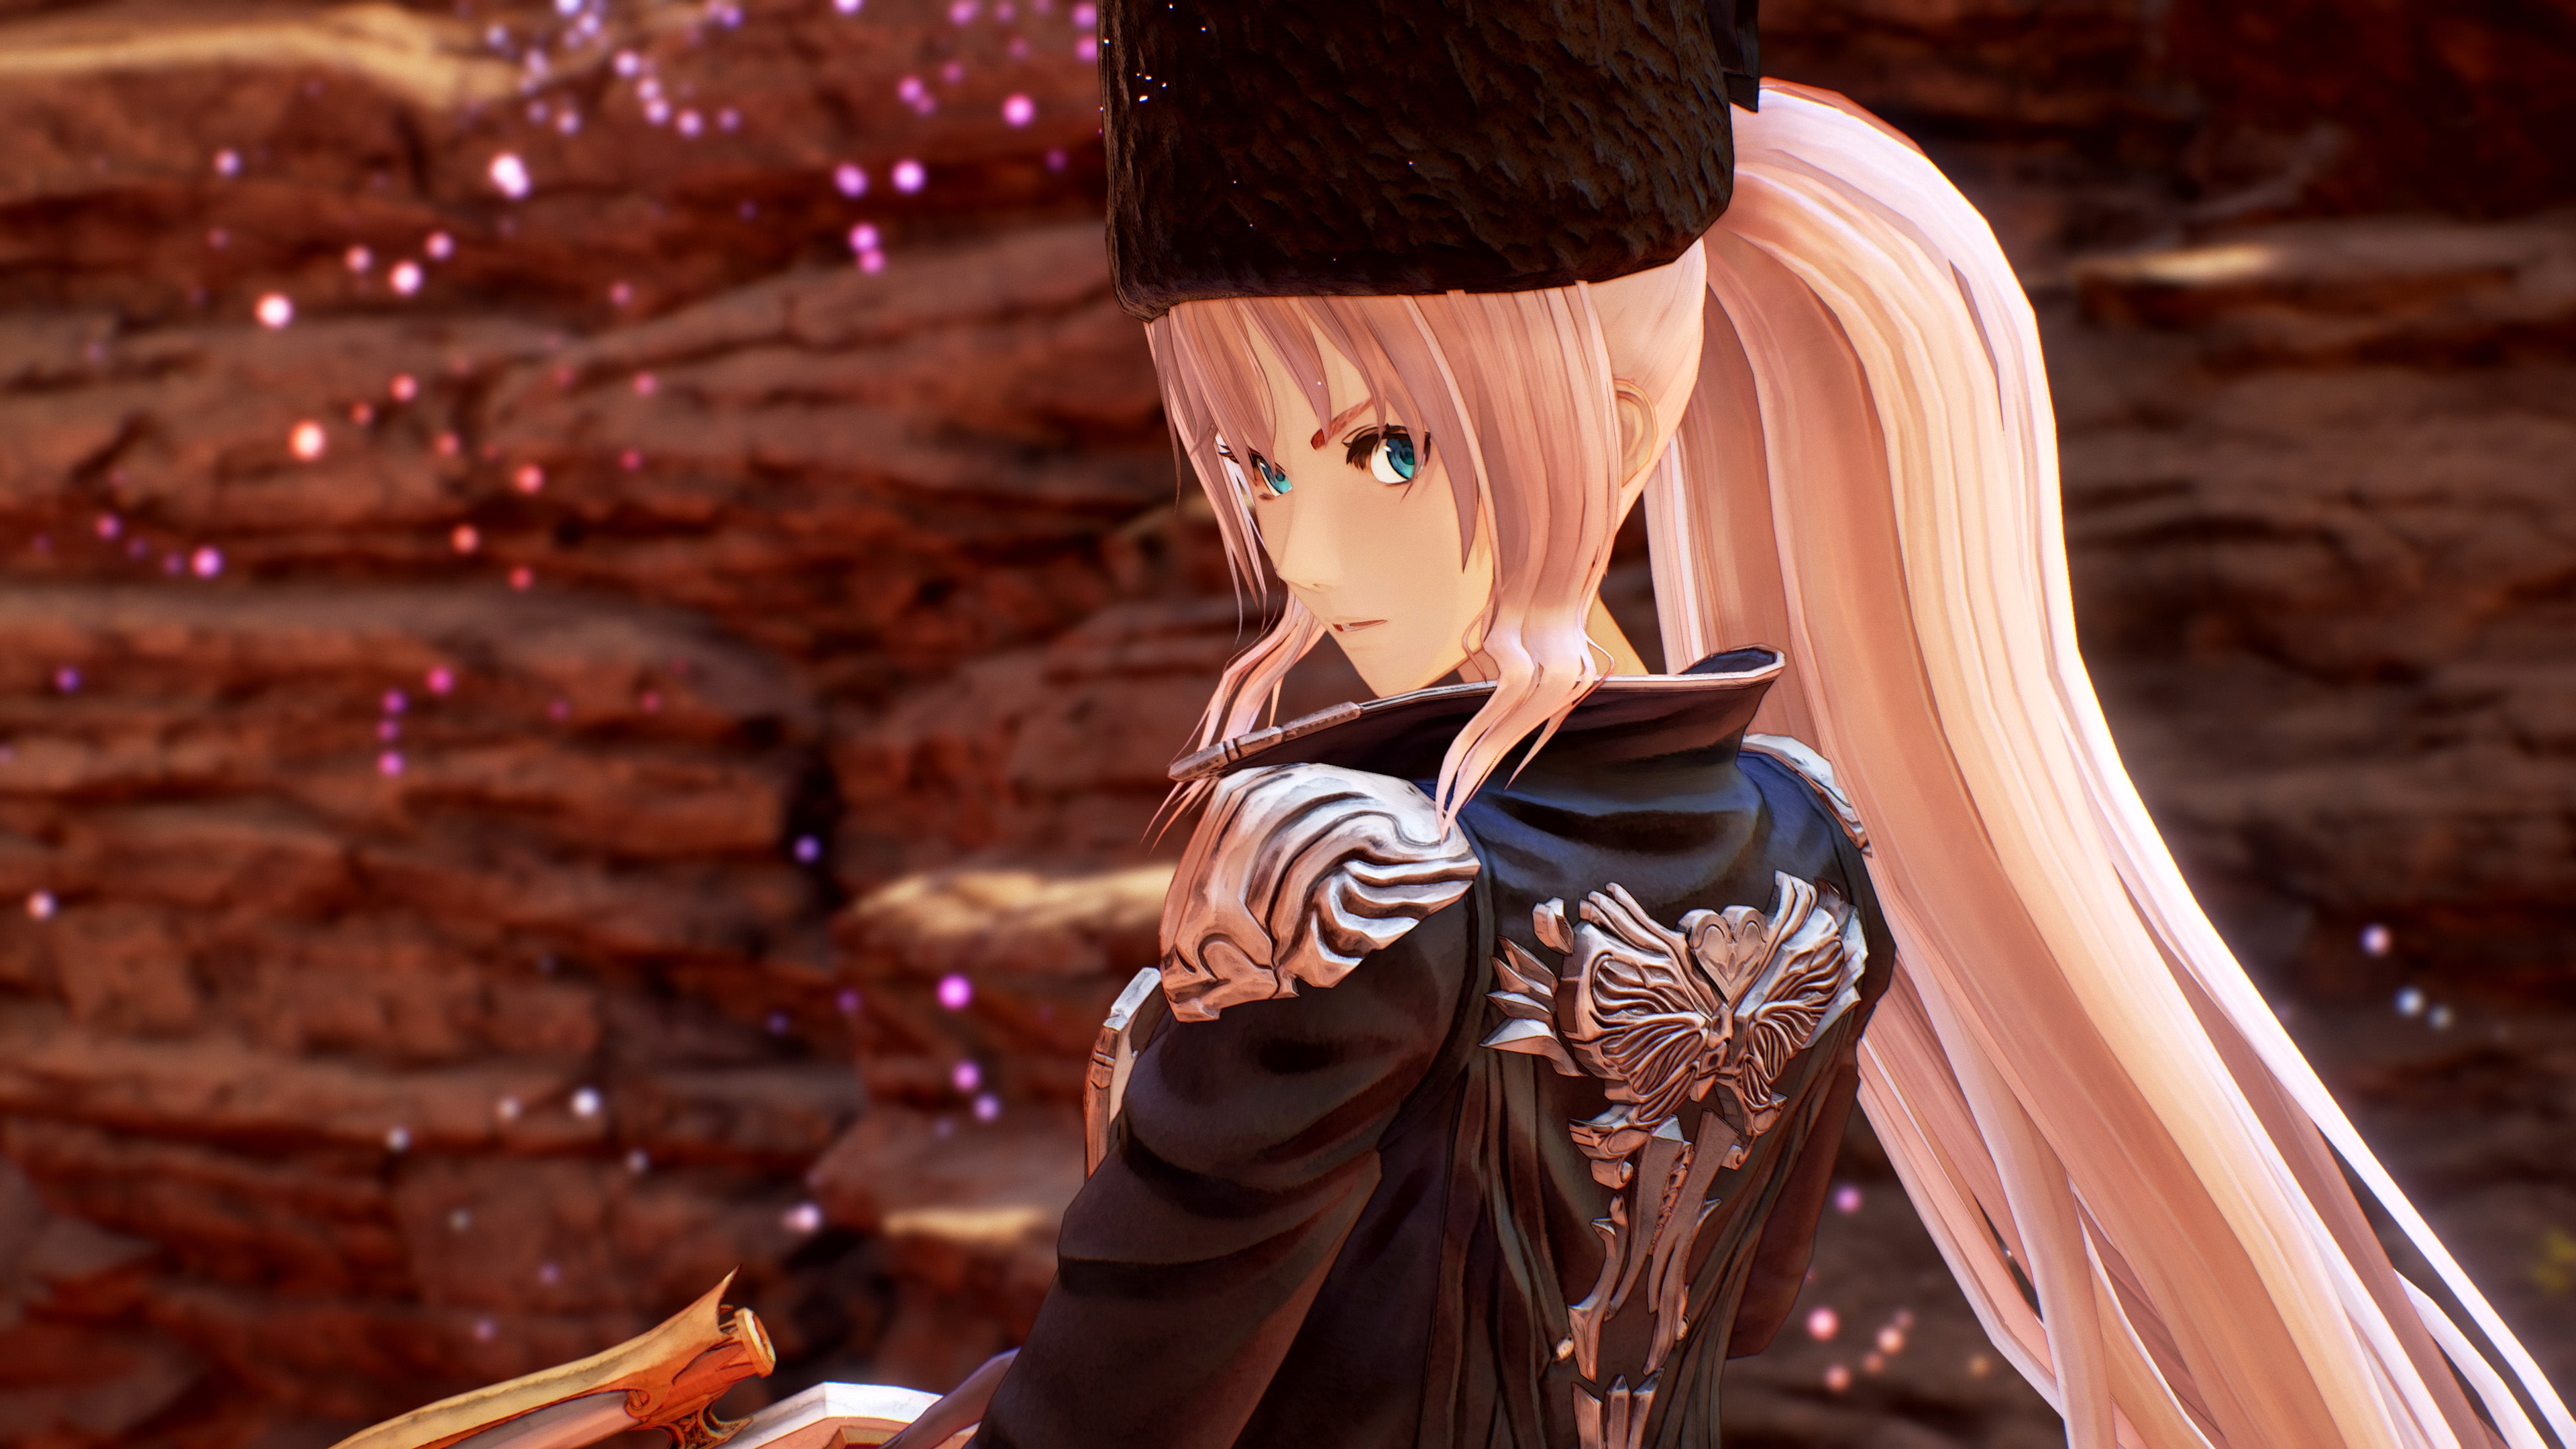 Tales of Arise x Scarlet Nexus Crossover Collaboration DLC